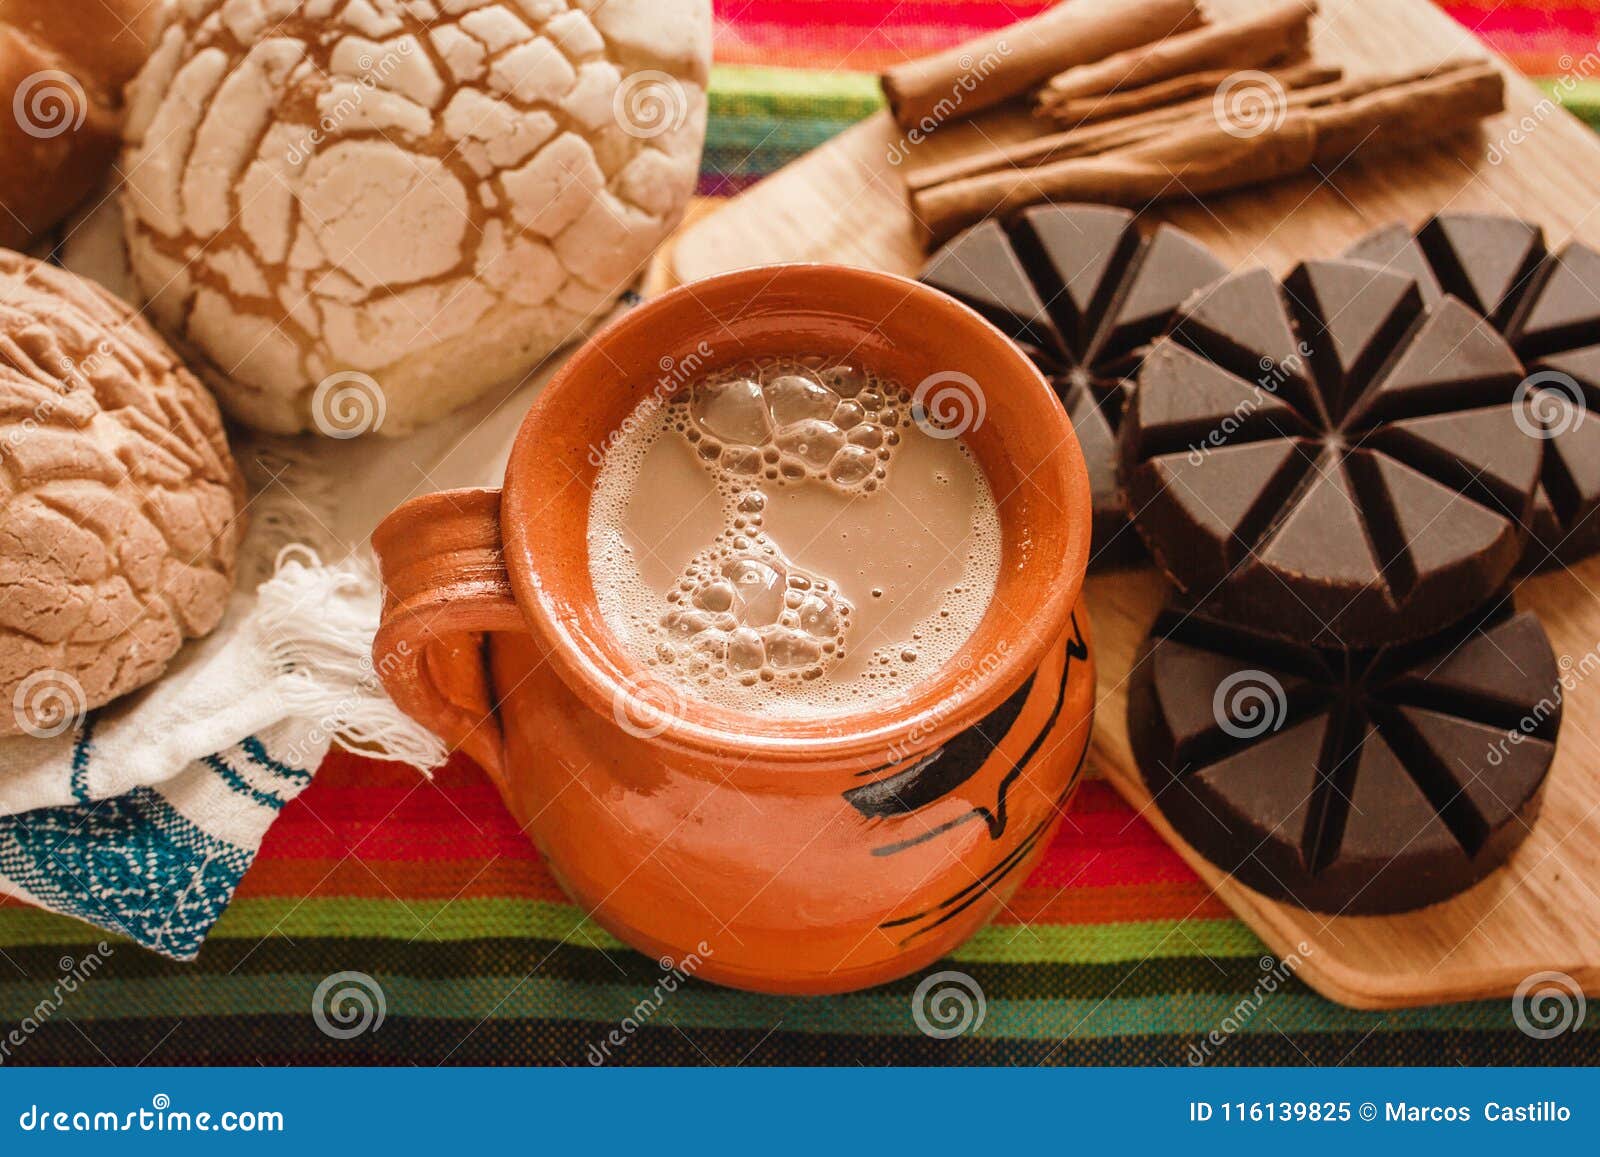 chocolate mexicano and conchas, cup of mexican chocolate from oaxaca mexico